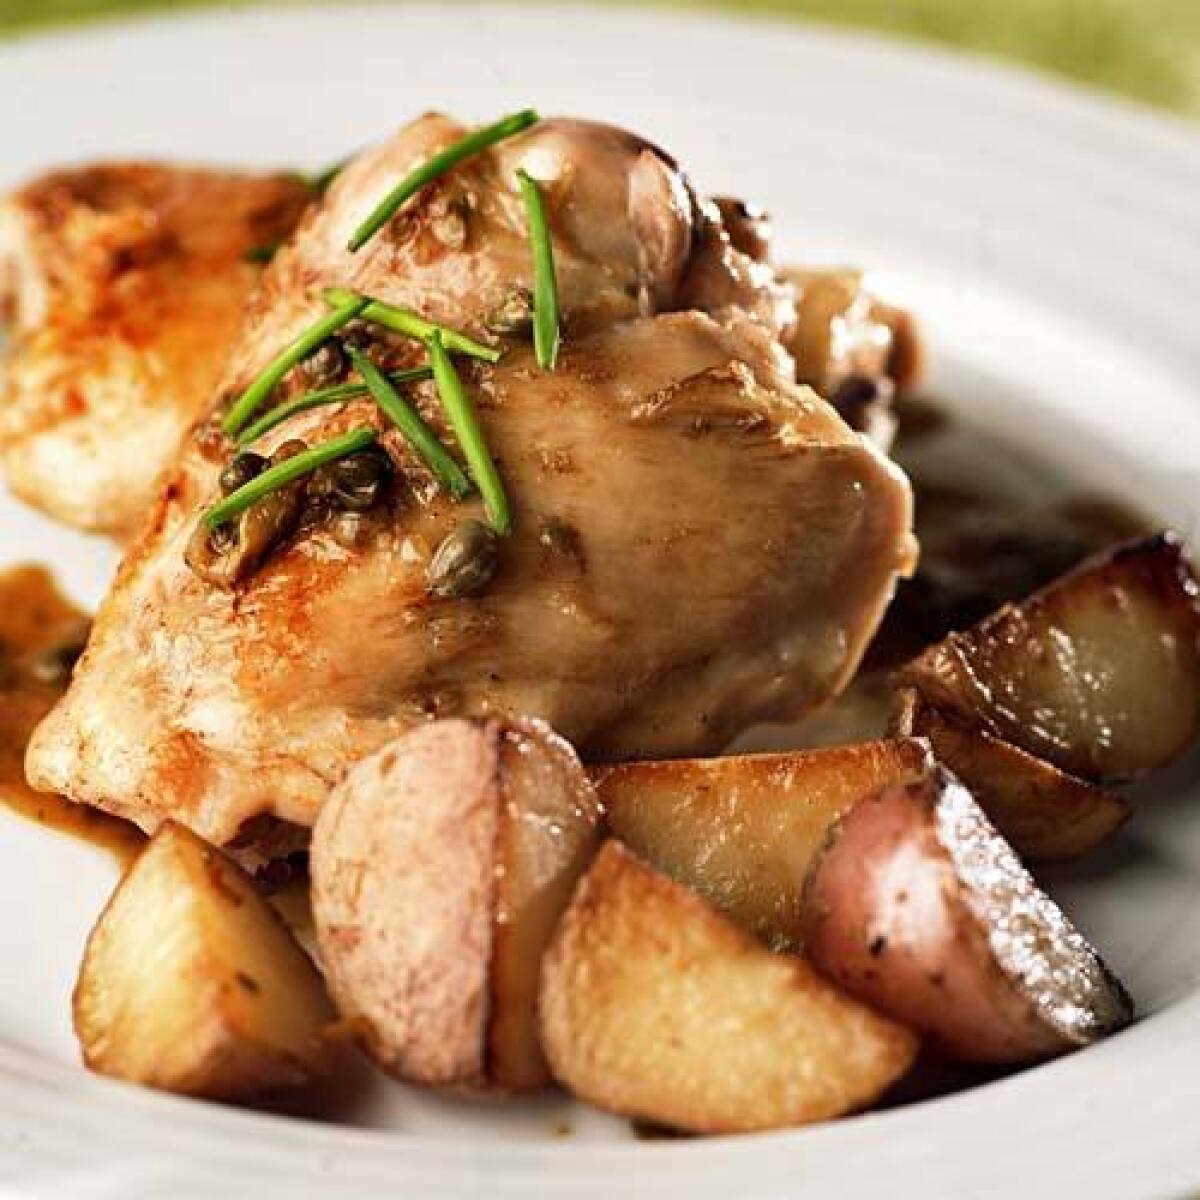 TENDER: Braised chicken with capers and new potatoes.